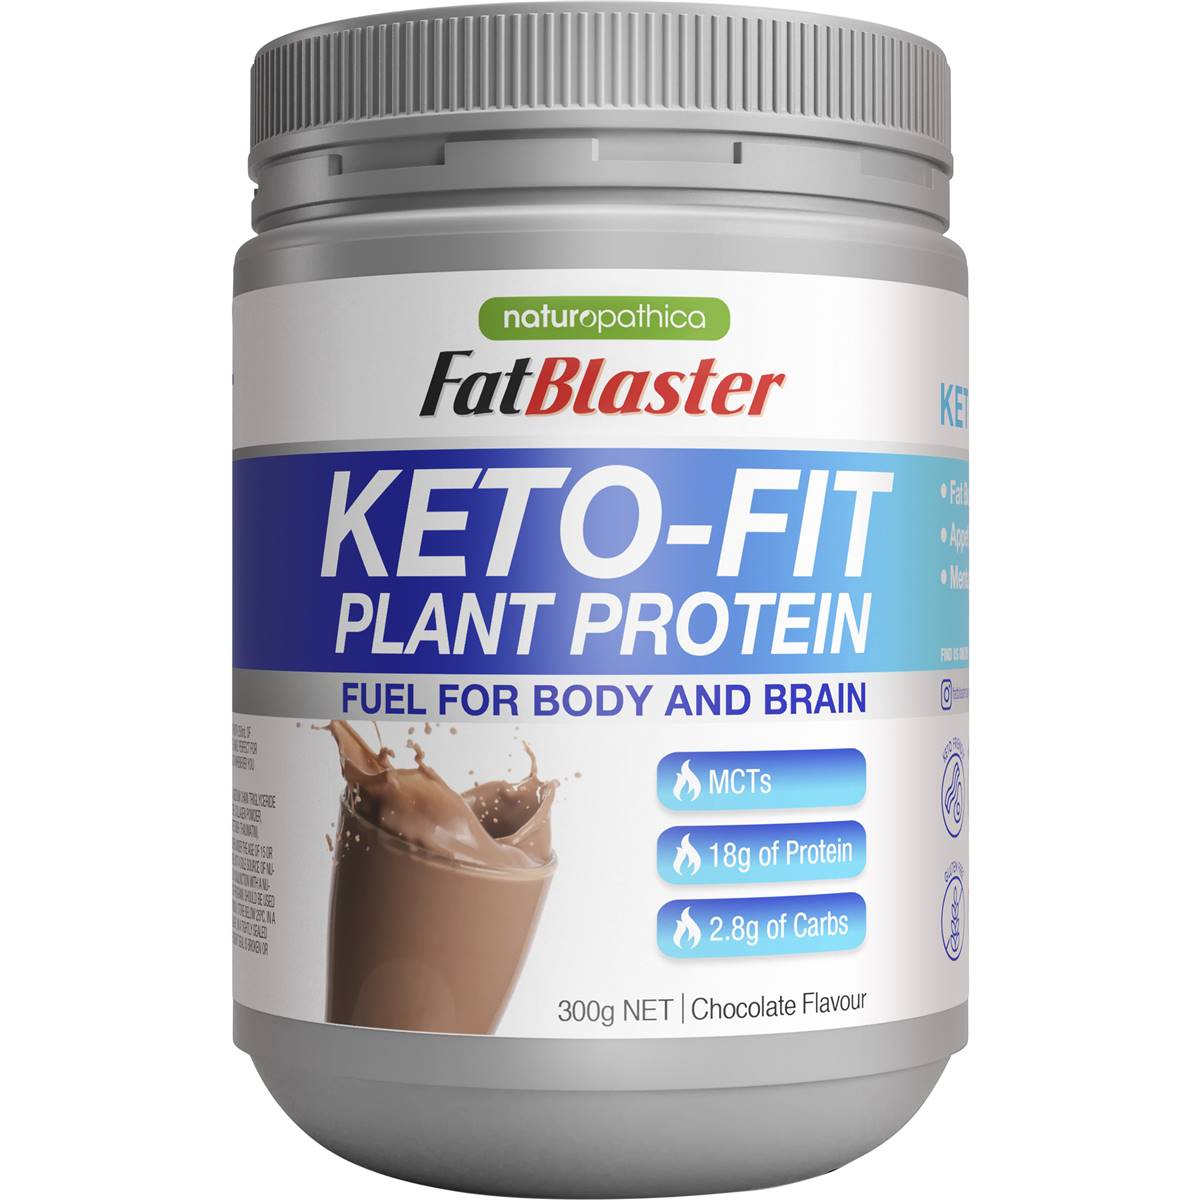 Calories in Naturopathica Fat Blaster Keto-fit Plant Protein Chocolate Flavour